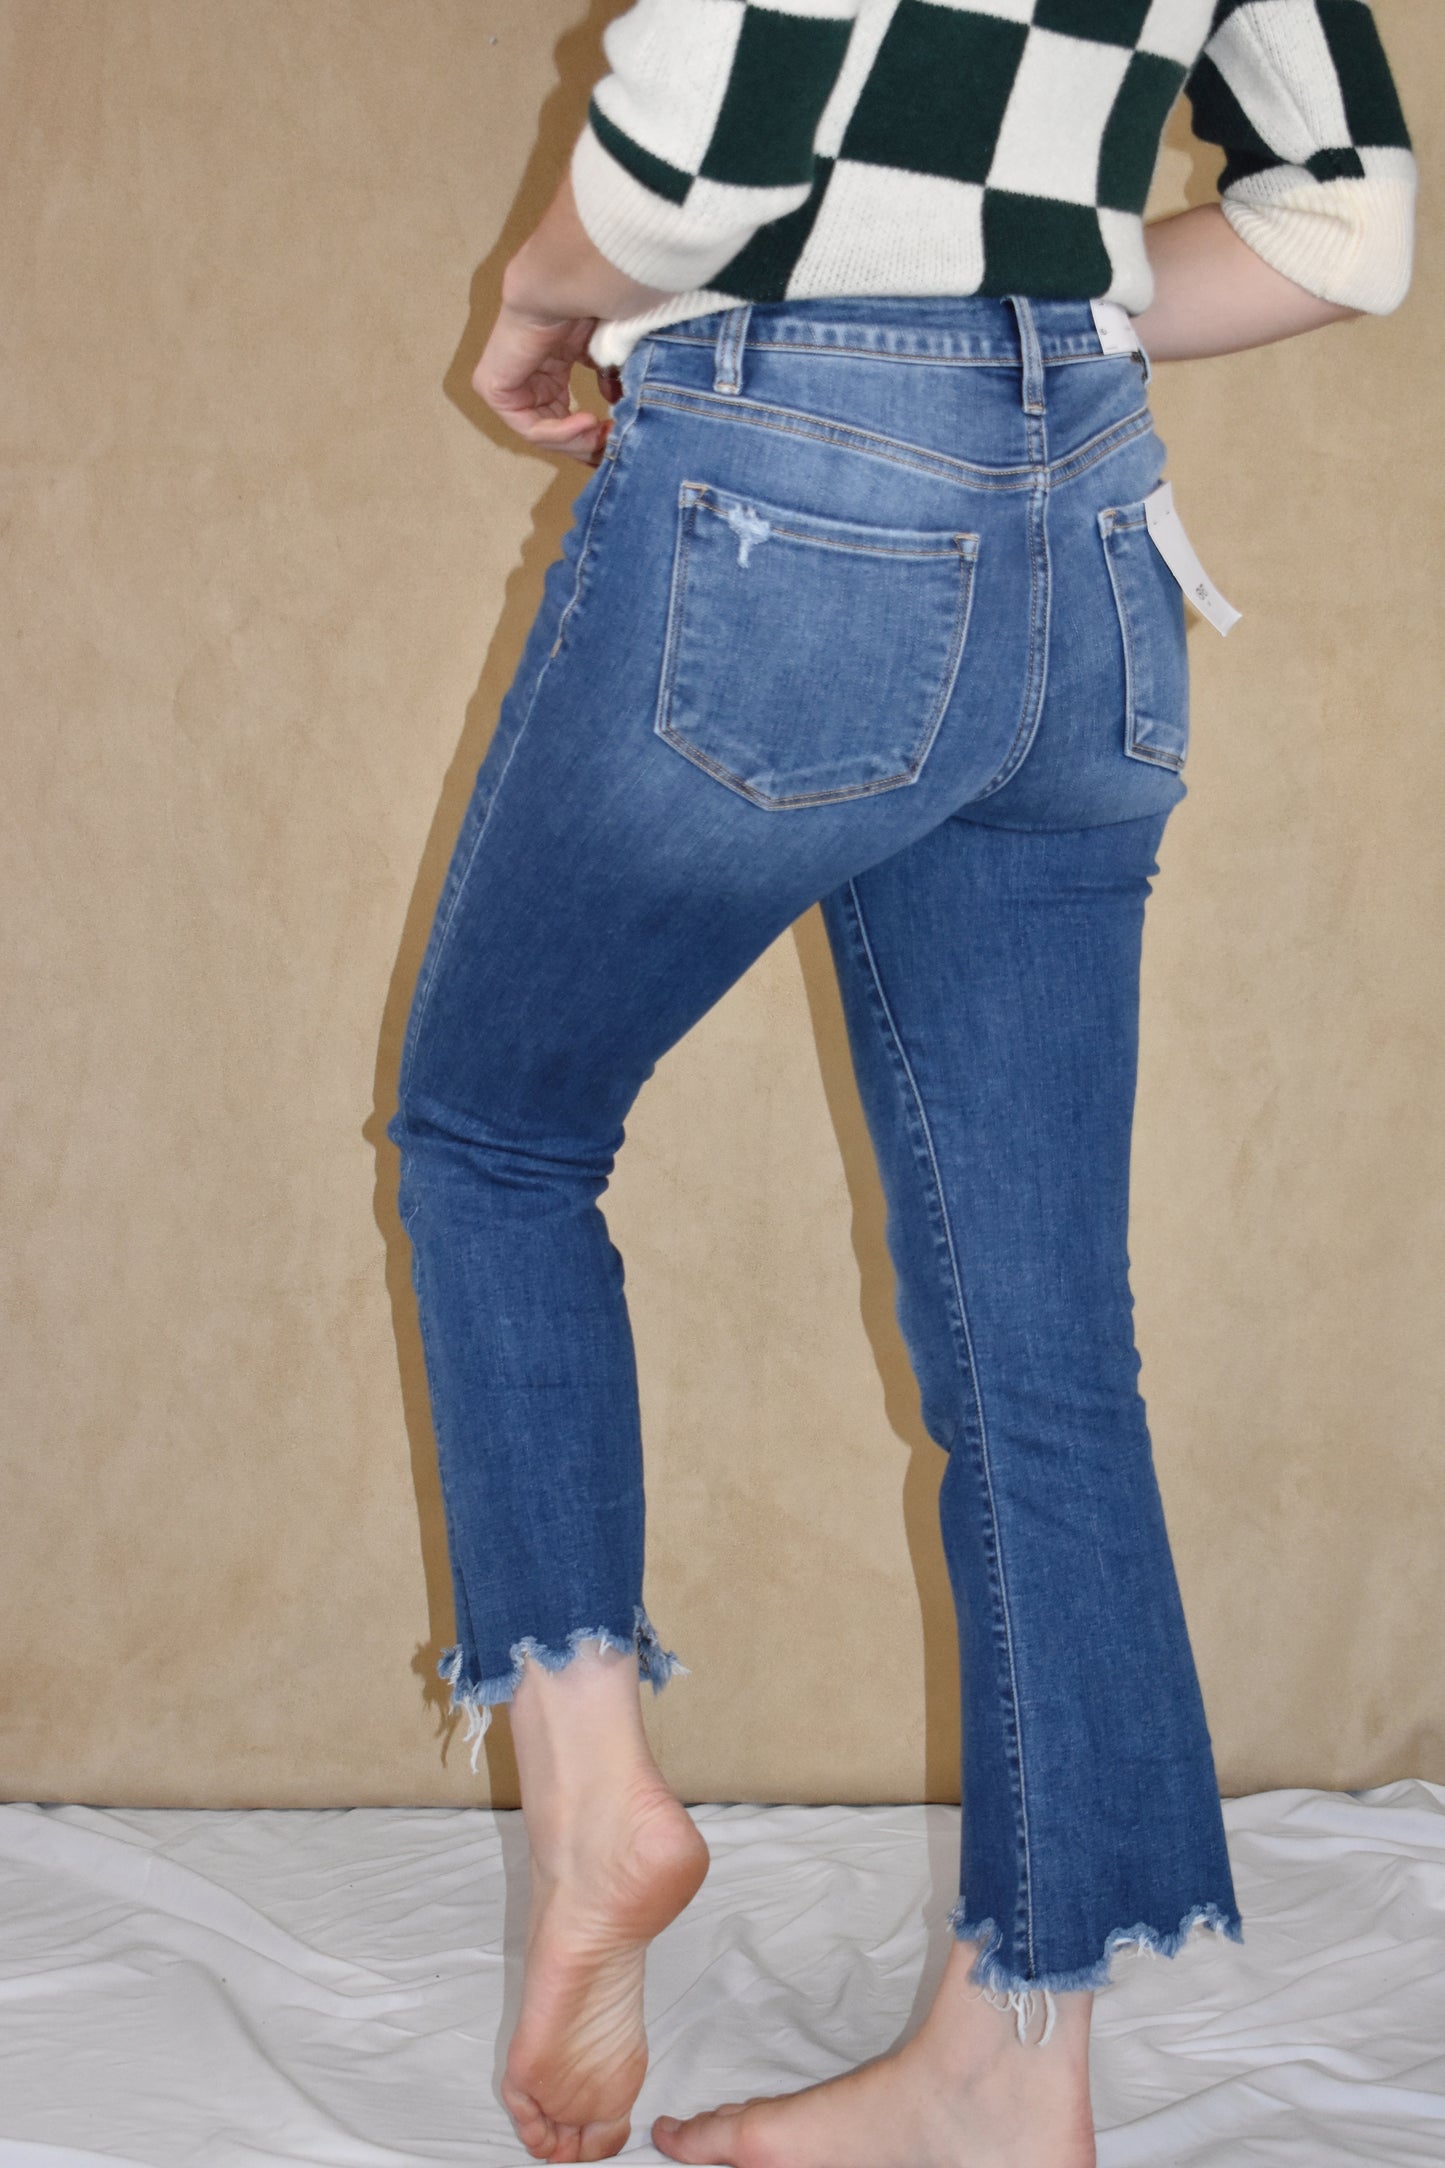 highwaisted cropped flare jeans. stretch denim with button fly and a raw hem. Vervet.